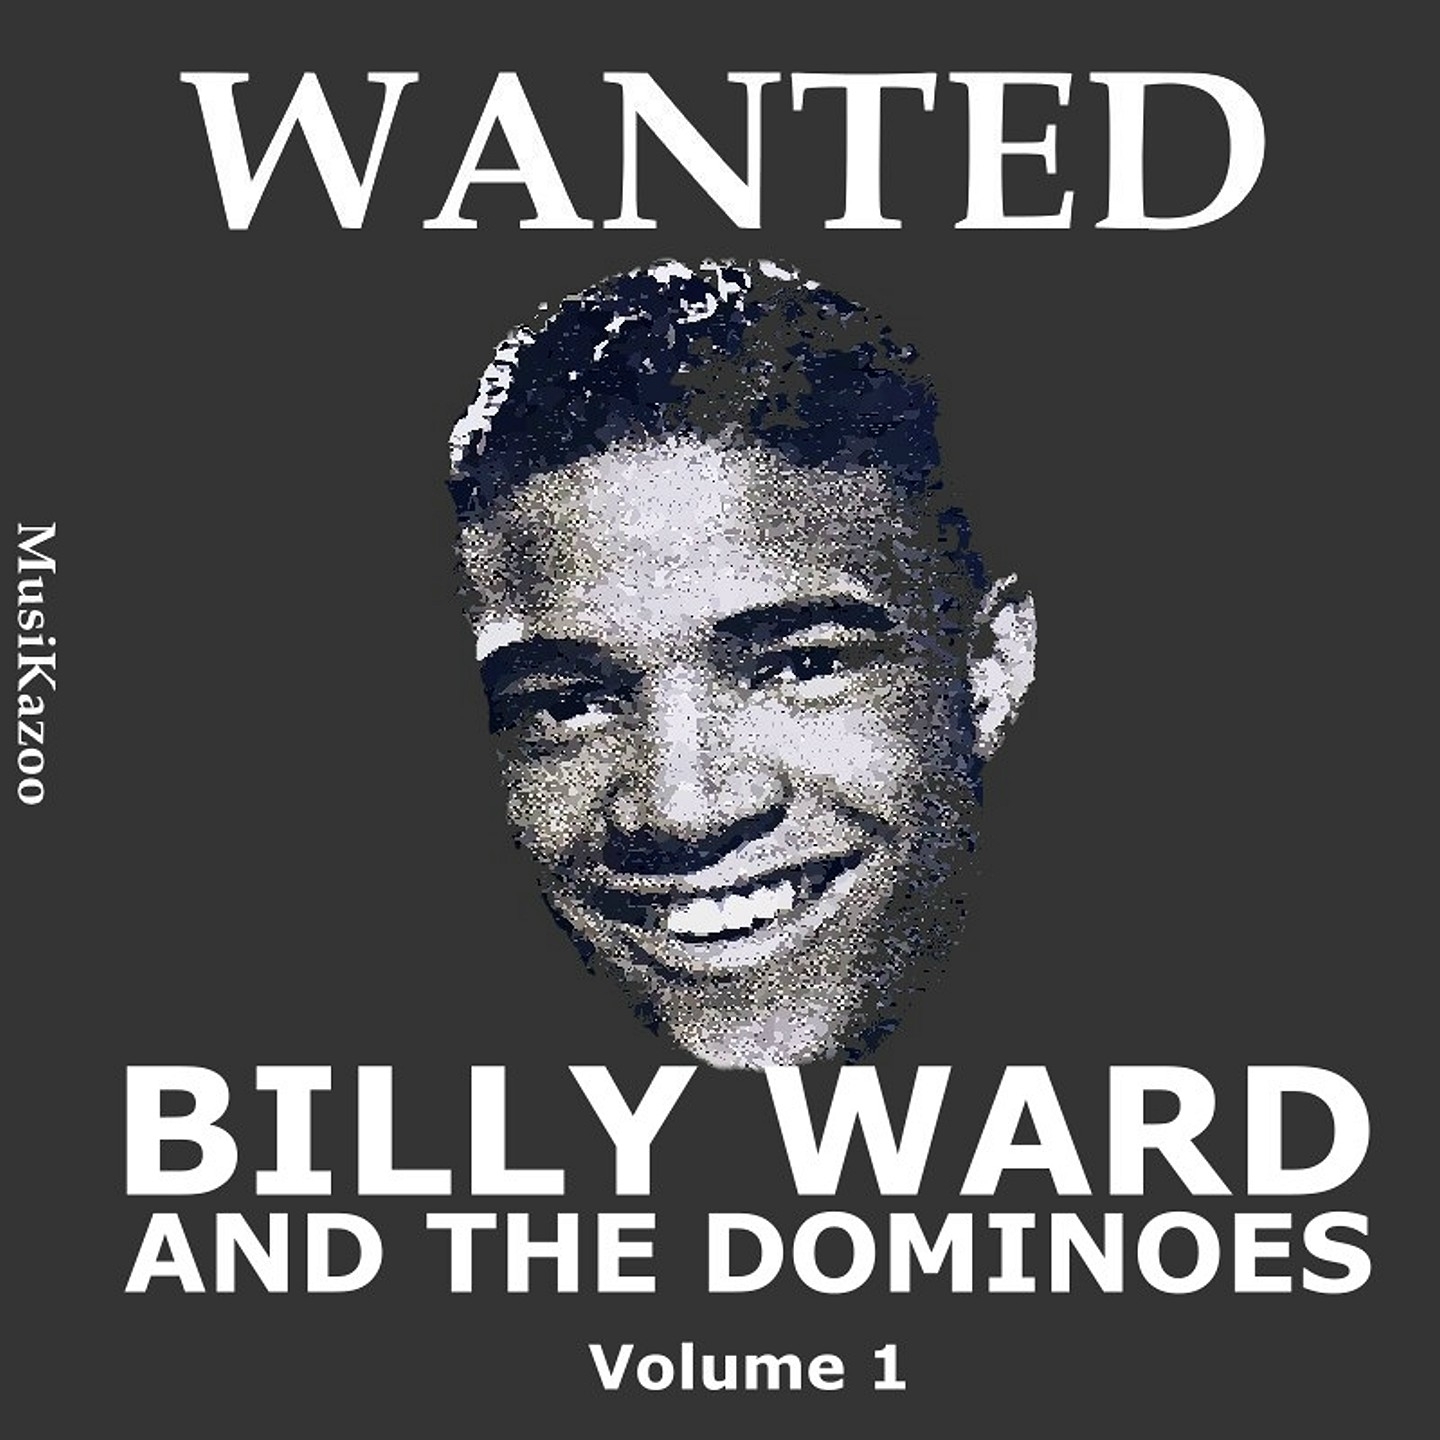 Wanted Billy Ward and His Dominoes